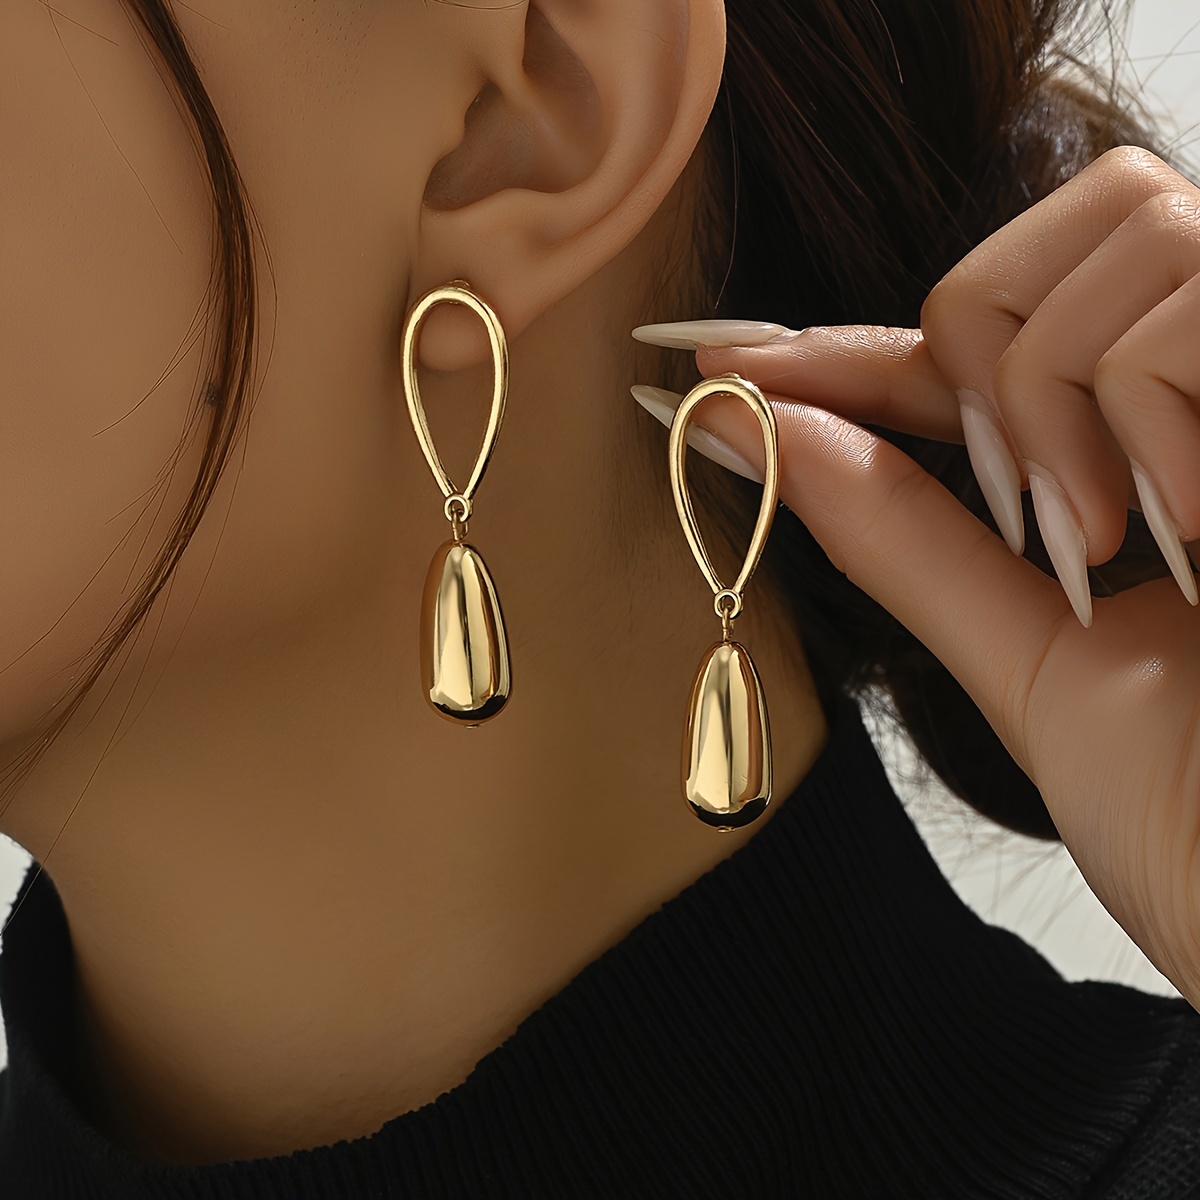 

1 Pair Of Dangle Earrings Golden Waterdrop Design Match Daily Outfits Party Accessories Symbol Of Beauty And Elegance Casual Dating Decor